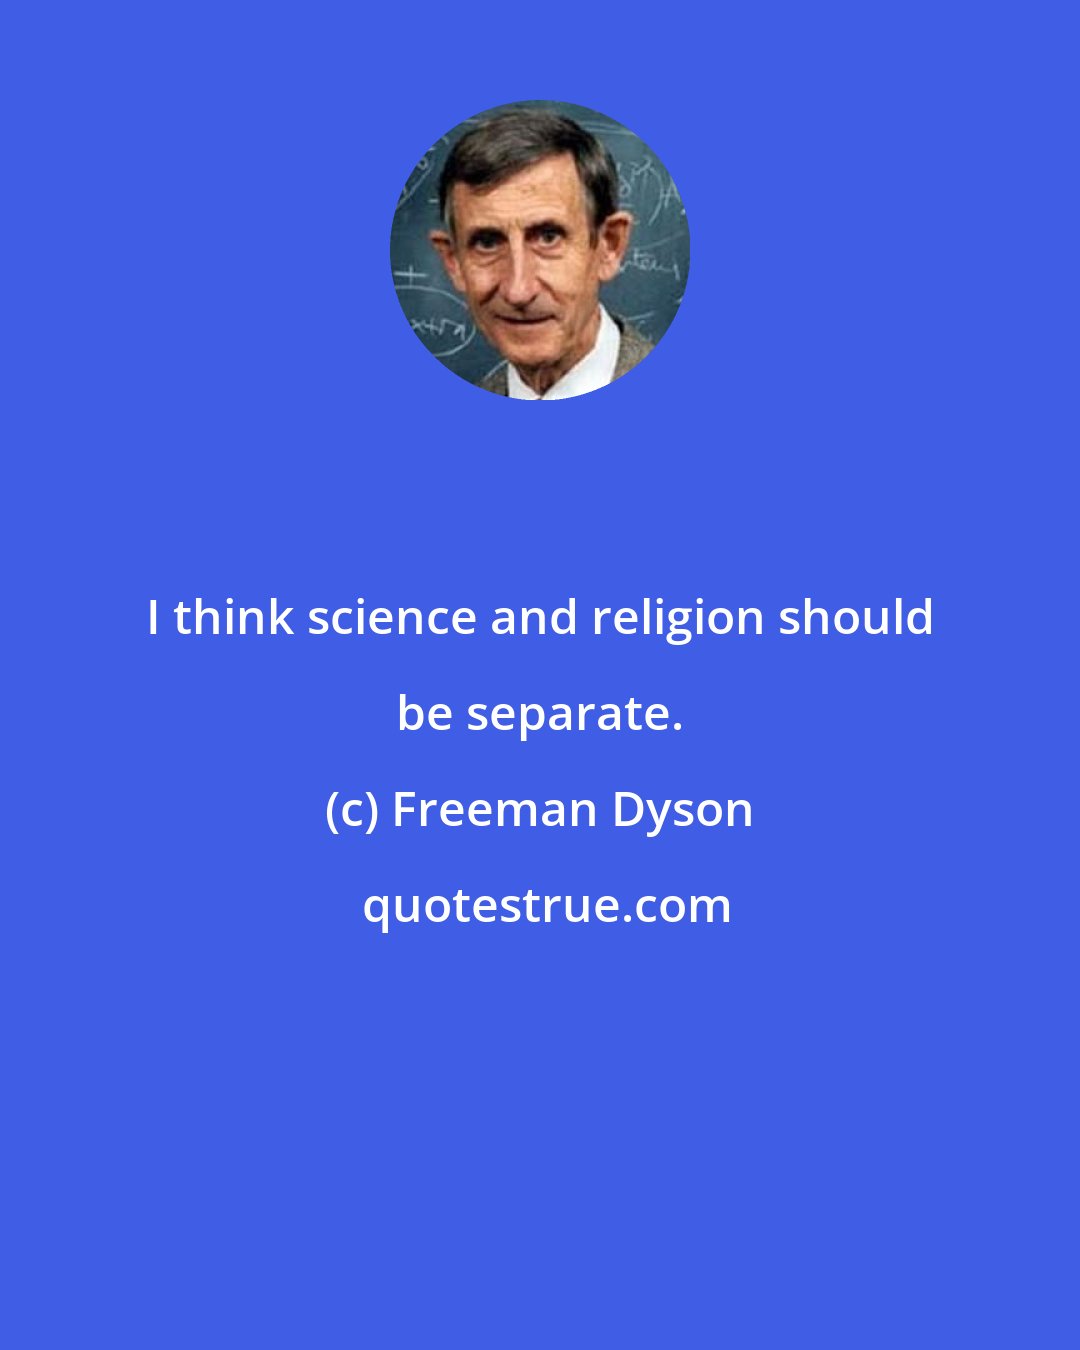 Freeman Dyson: I think science and religion should be separate.